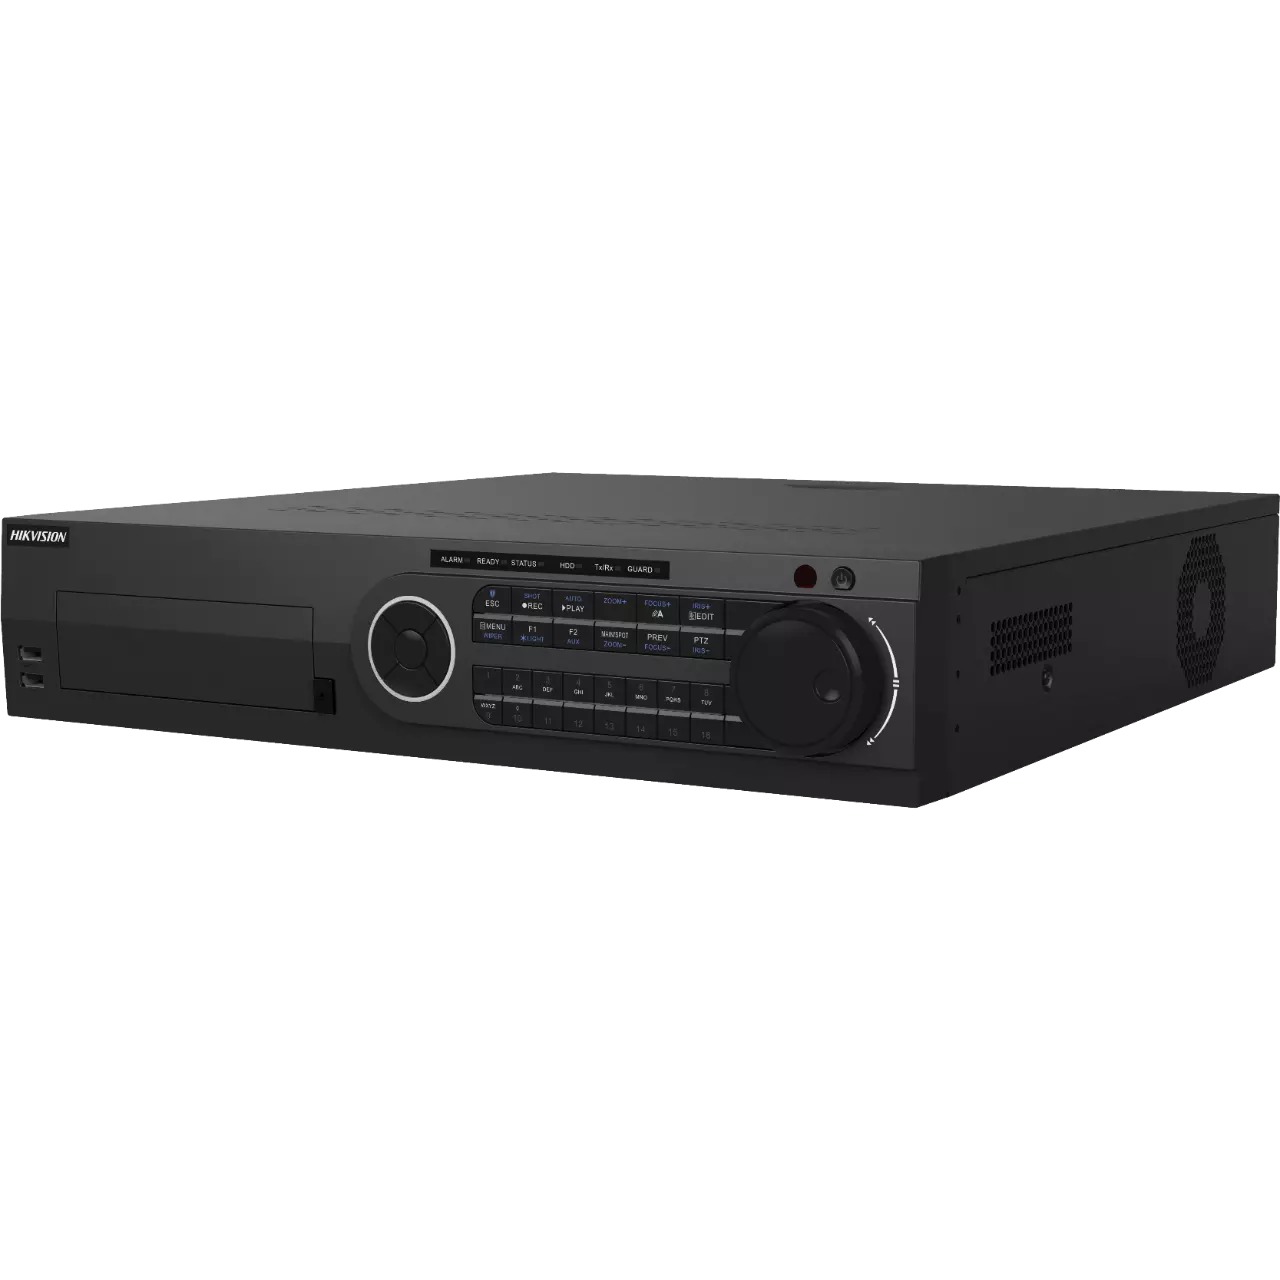 NVR Hikvision DS-7616NI-I2/16P 16 canale